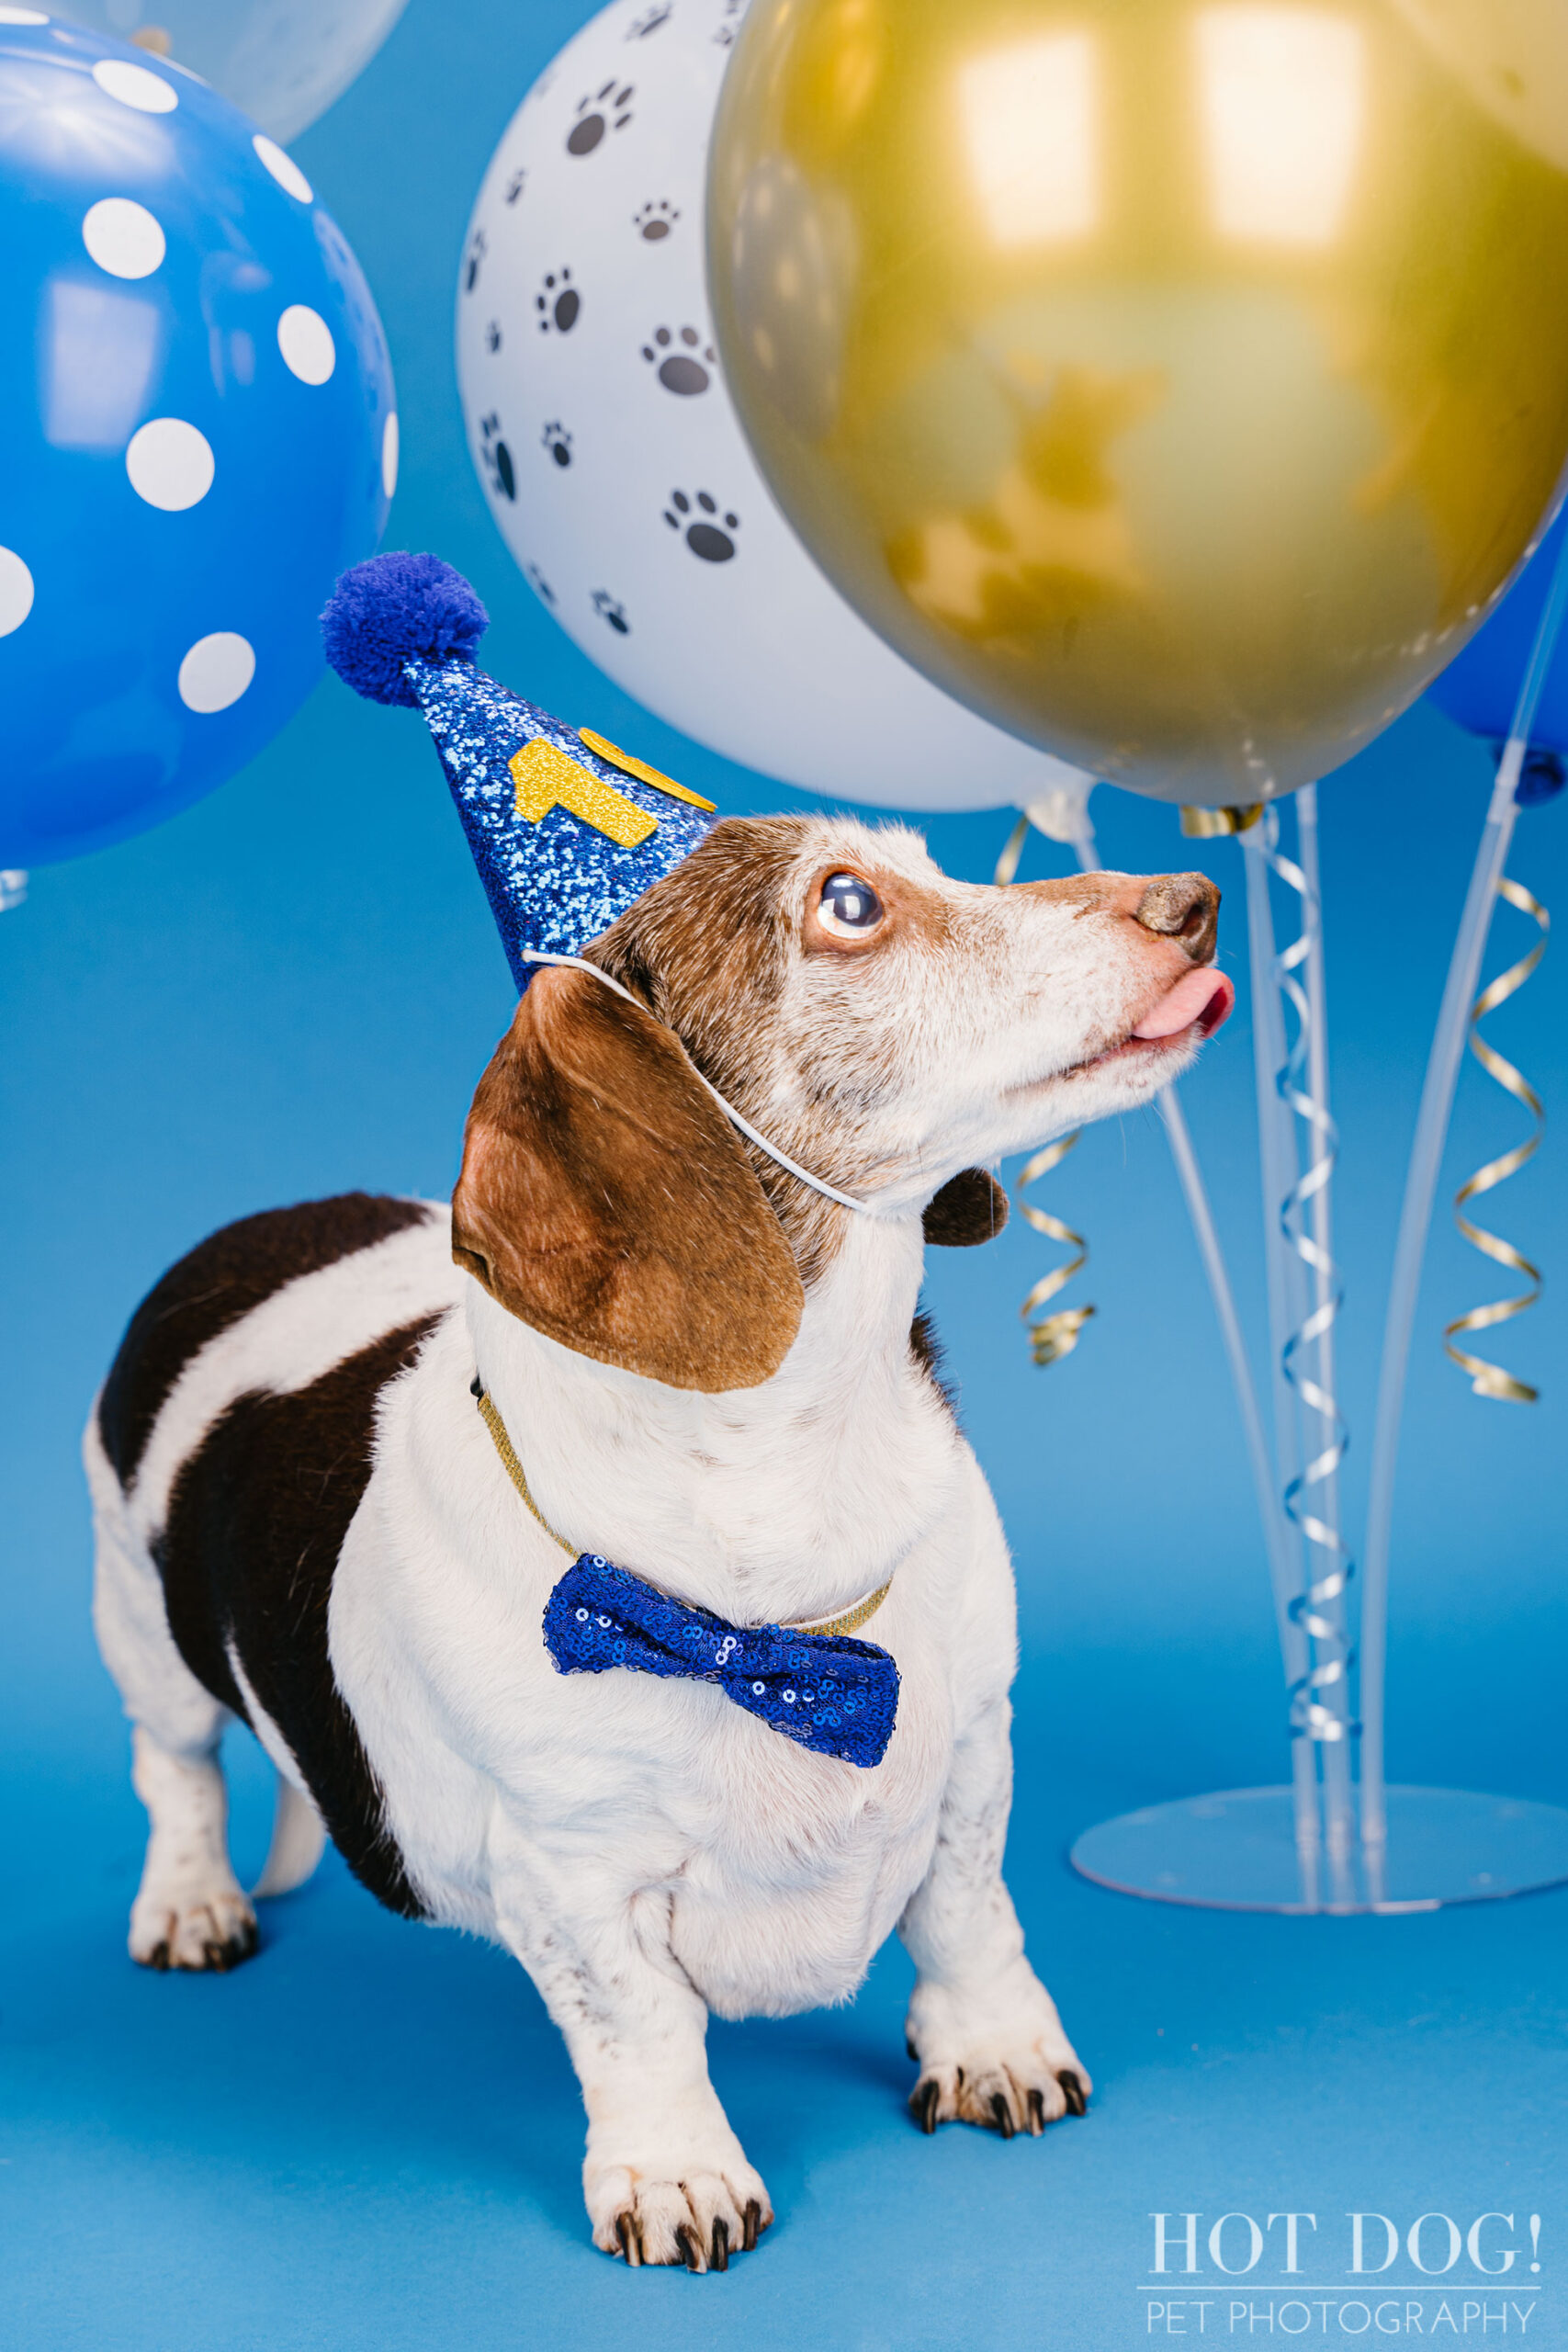 Dog birthday photo by Hot Dog! Pet Photography in Central Florida